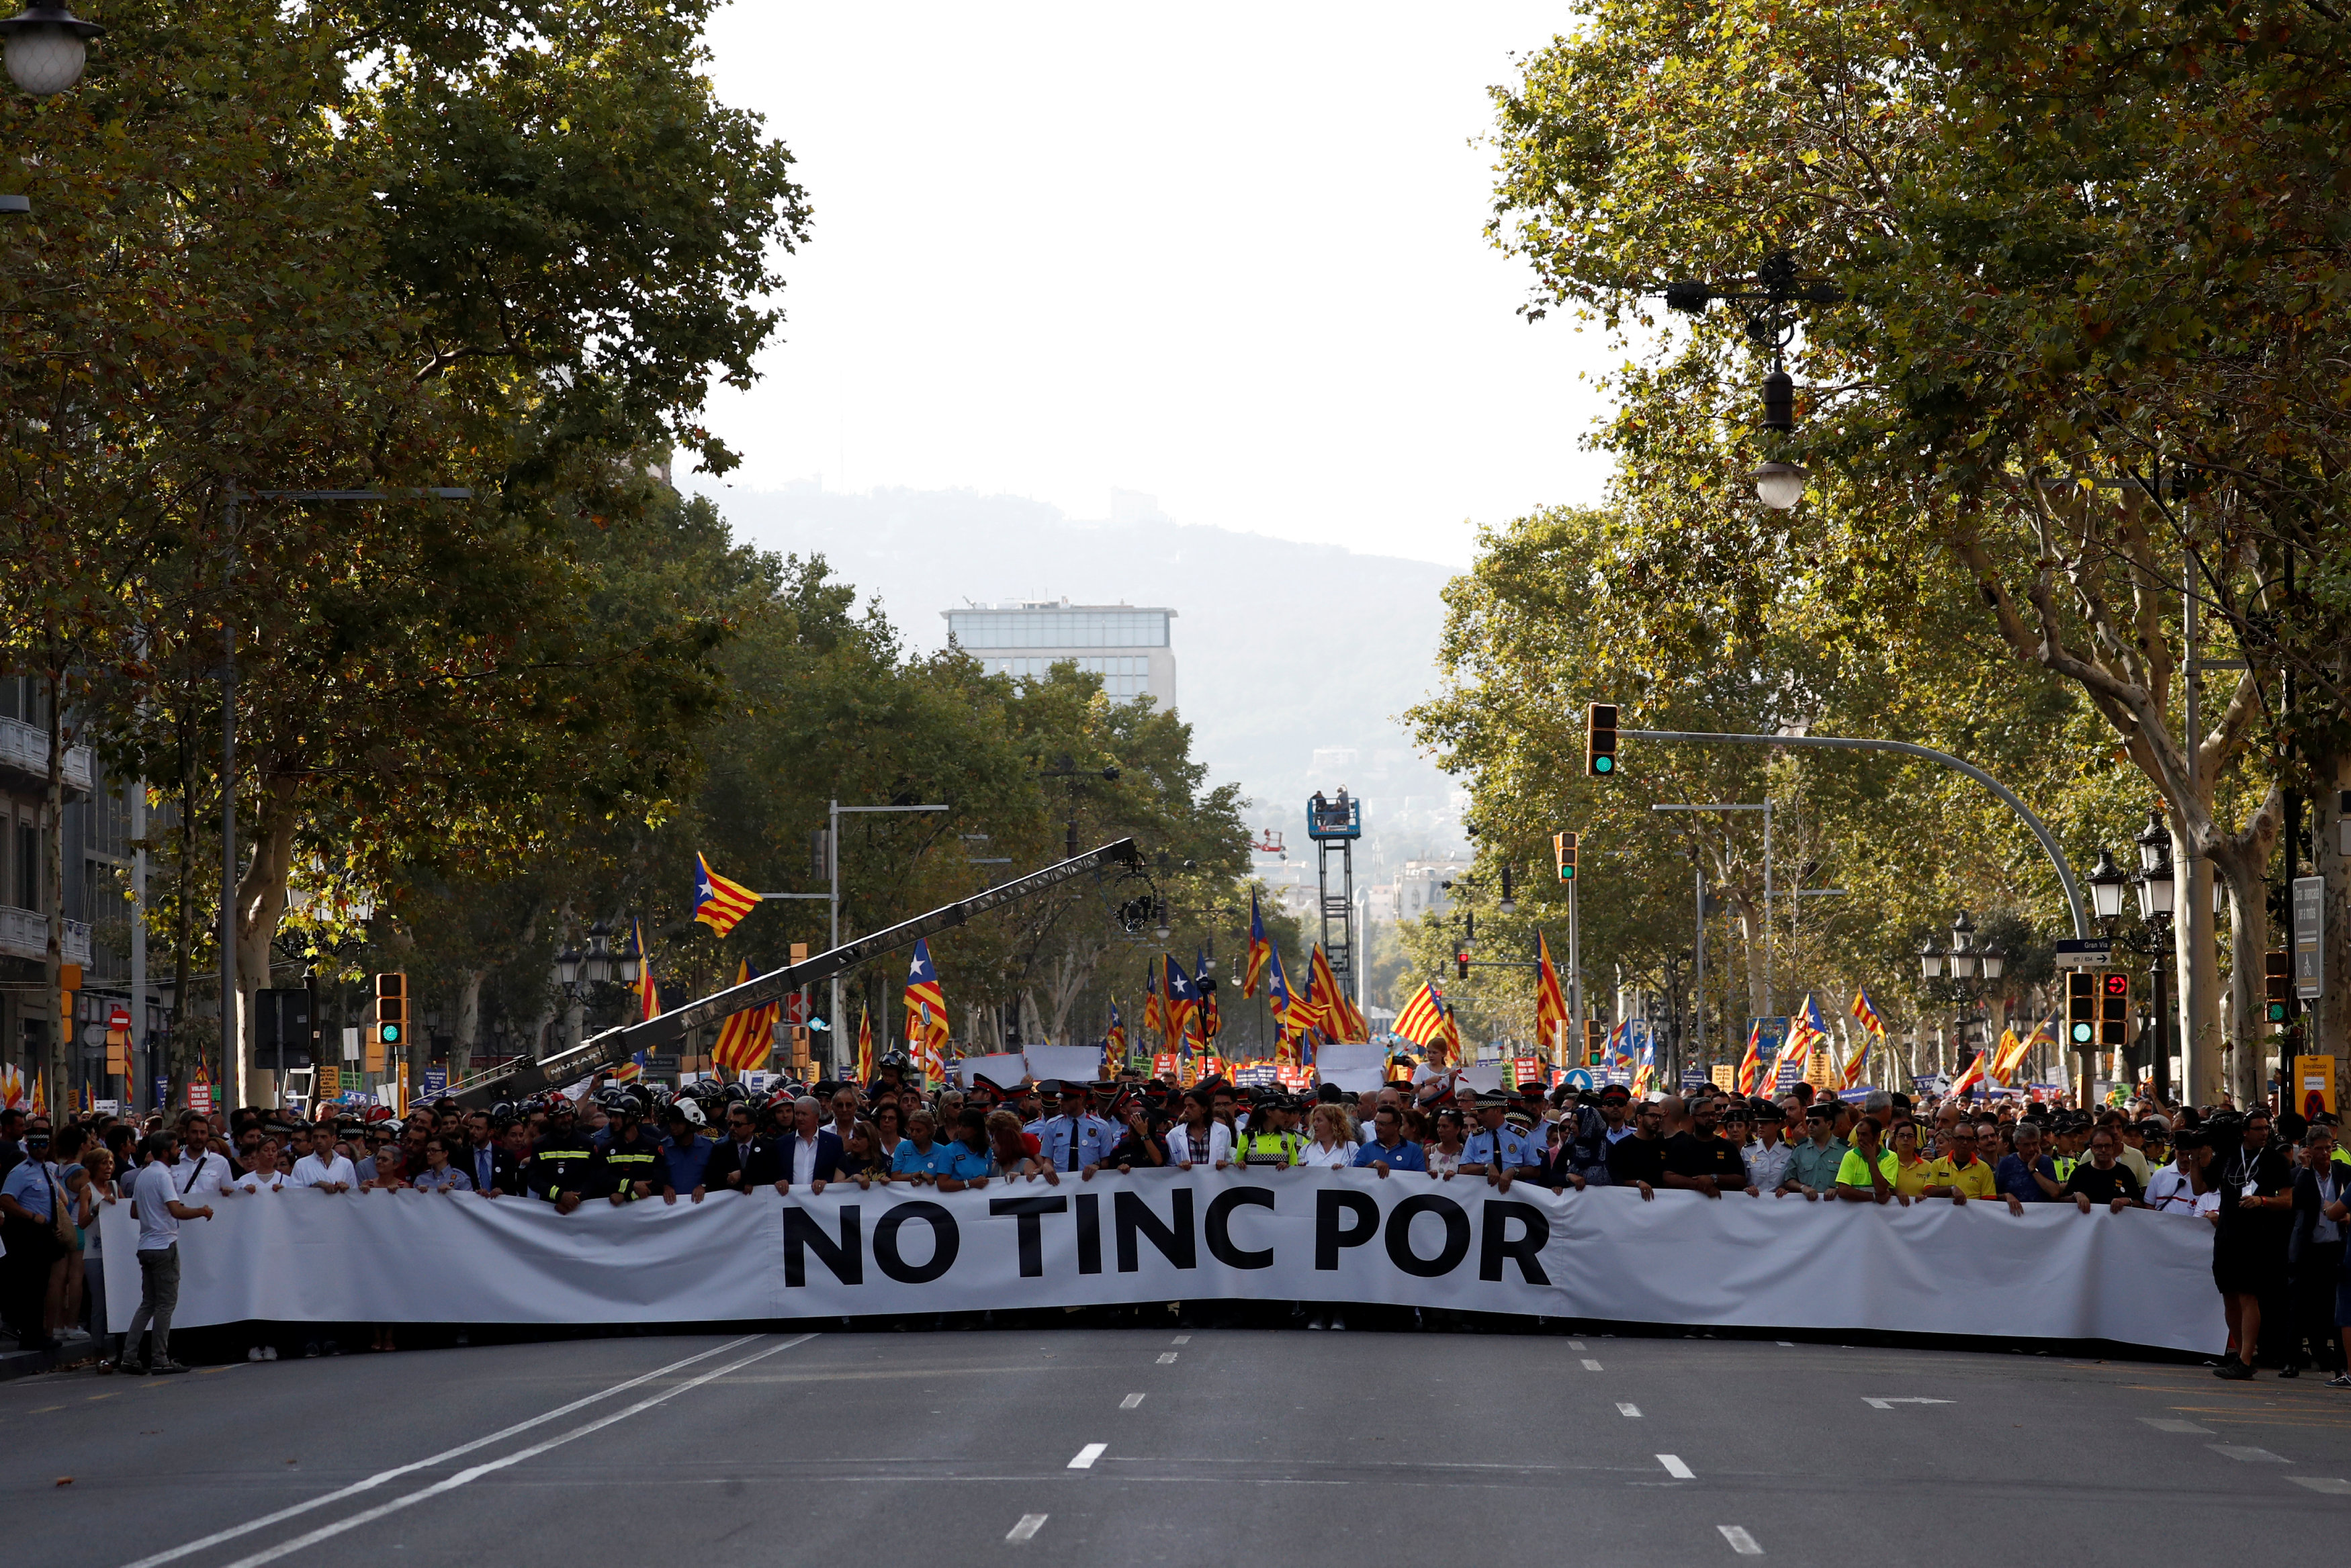 In pictures: March of unity after last week attacks in Spanish city of Barcelona